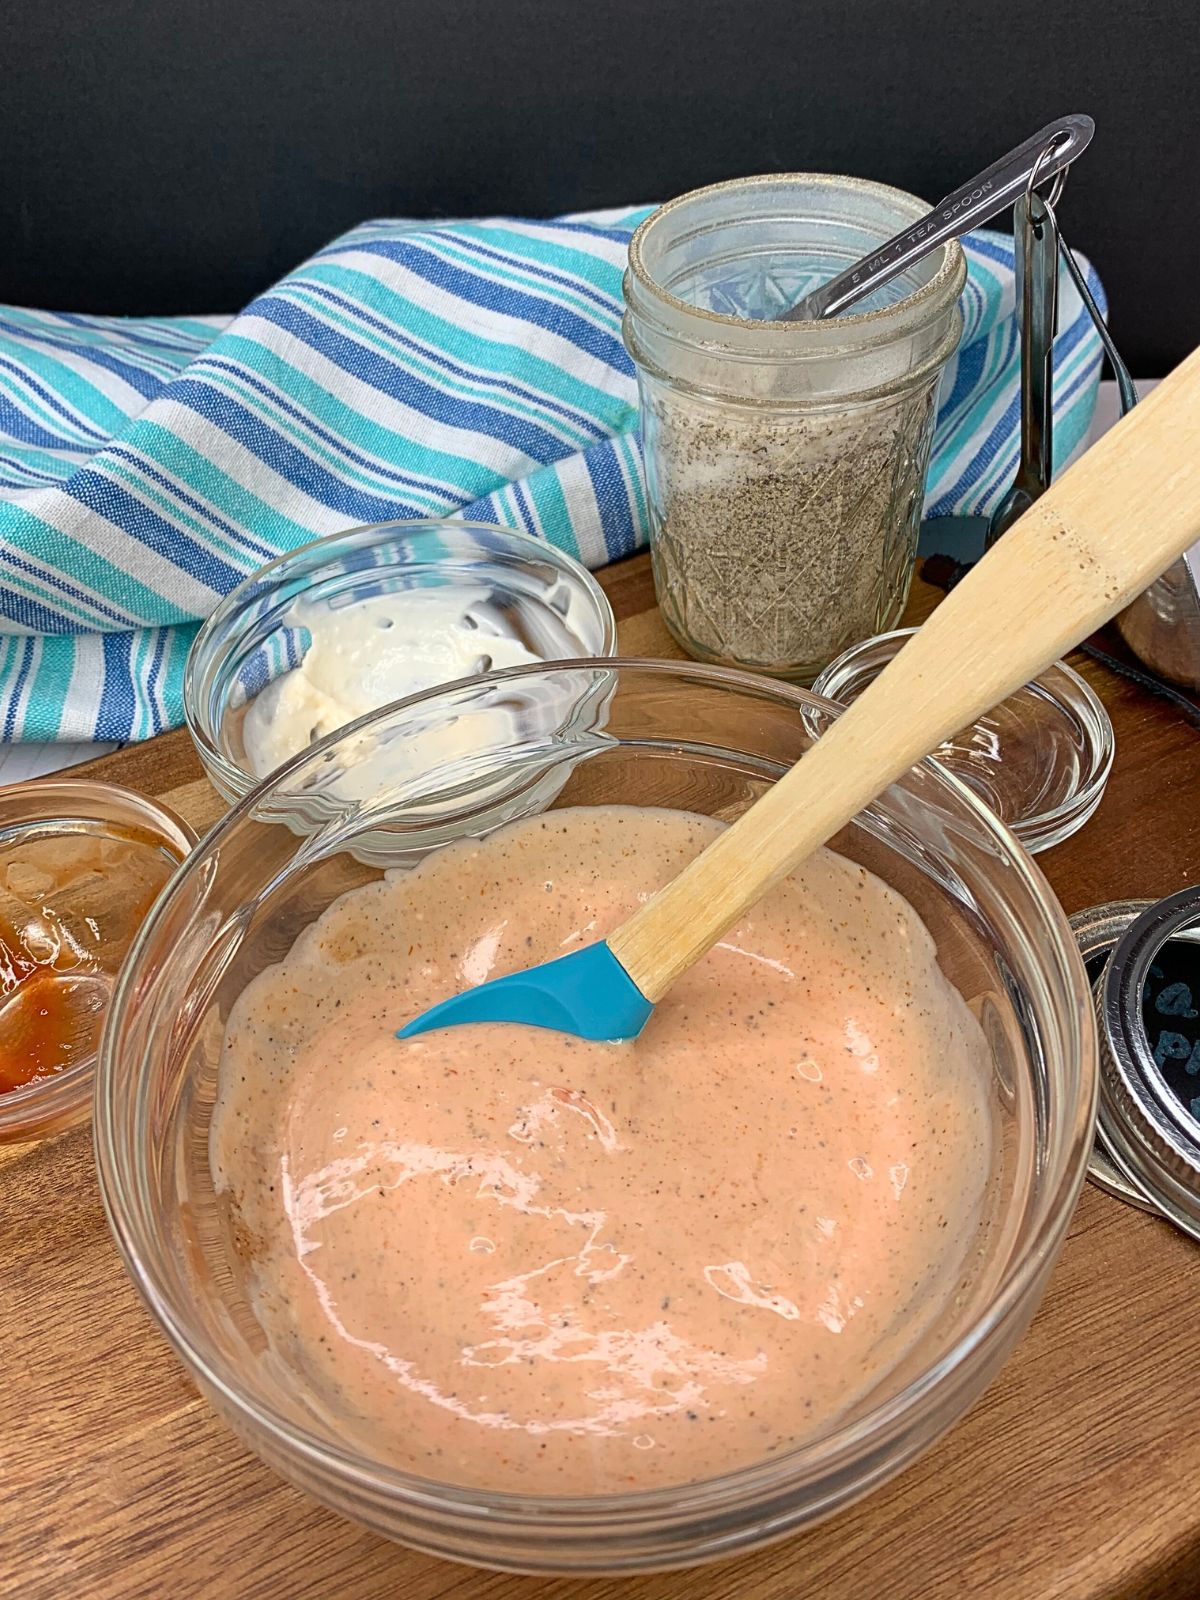 ingredients for pizza dipping sauce combined in bowl with rubber spatula.